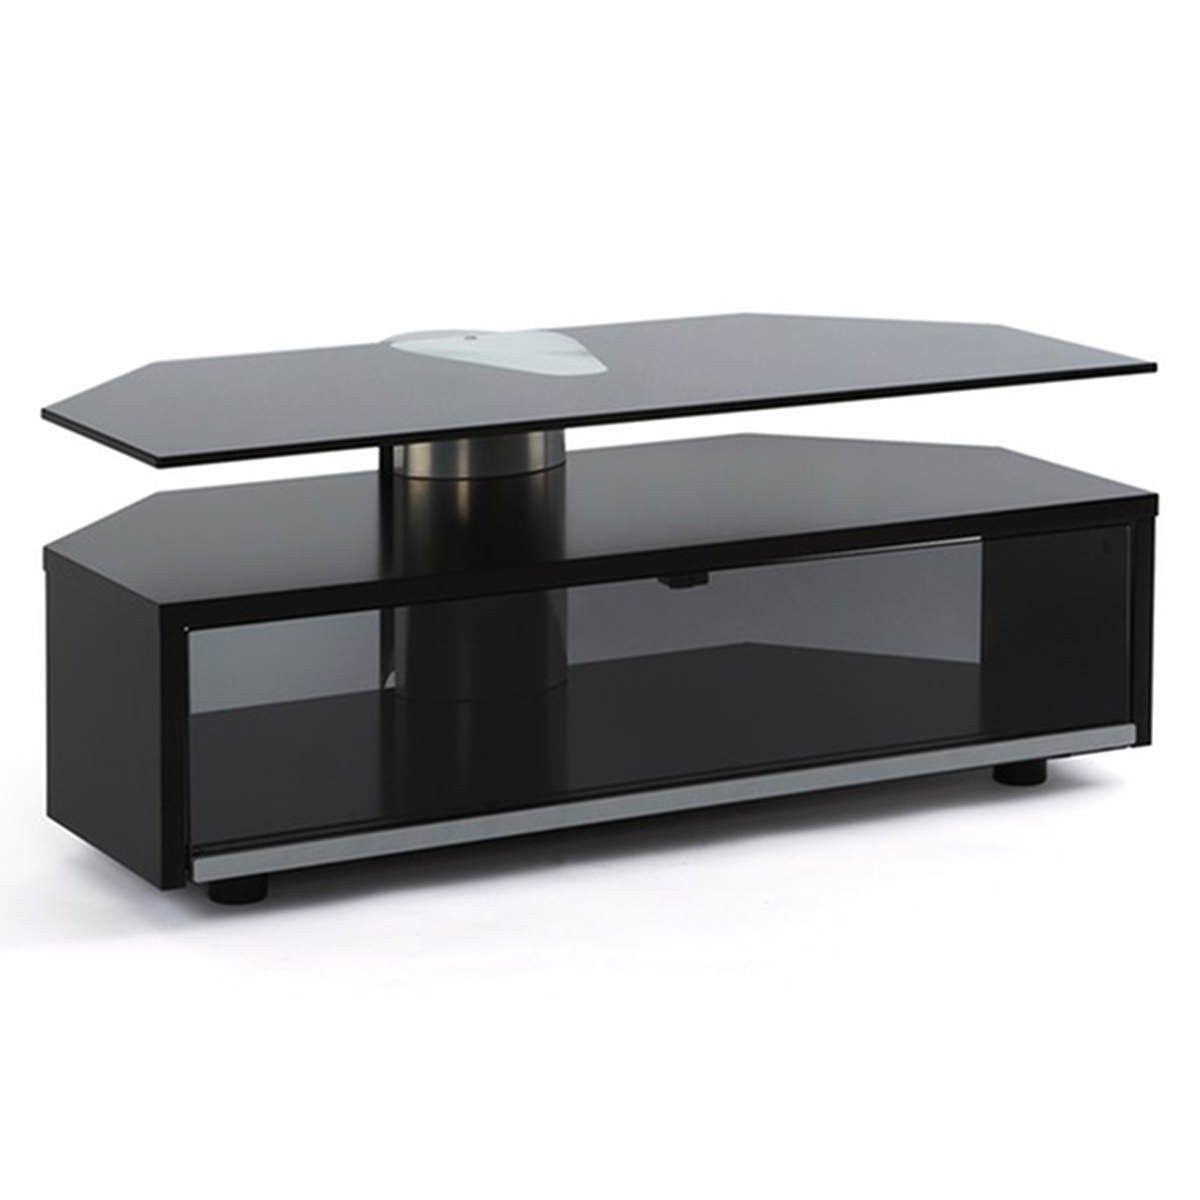 Off The Wall Duo Glass Fronted Tv Cabinet Stand 1000mm Black Regarding Newest Glass Fronted Tv Cabinet (View 1 of 20)